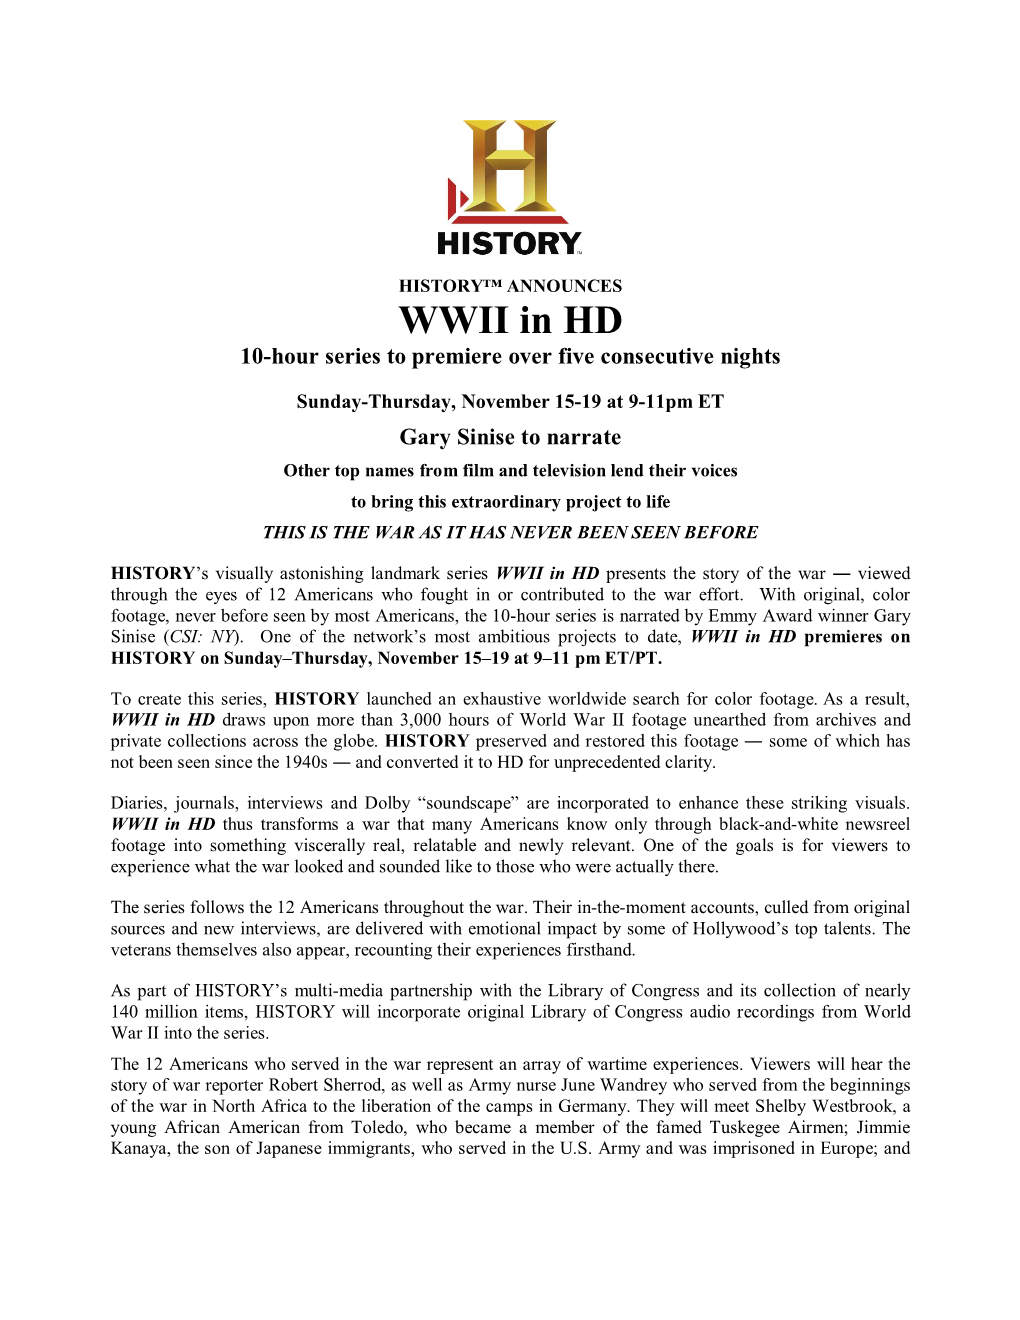 WWII in HD 10-Hour Series to Premiere Over Five Consecutive Nights